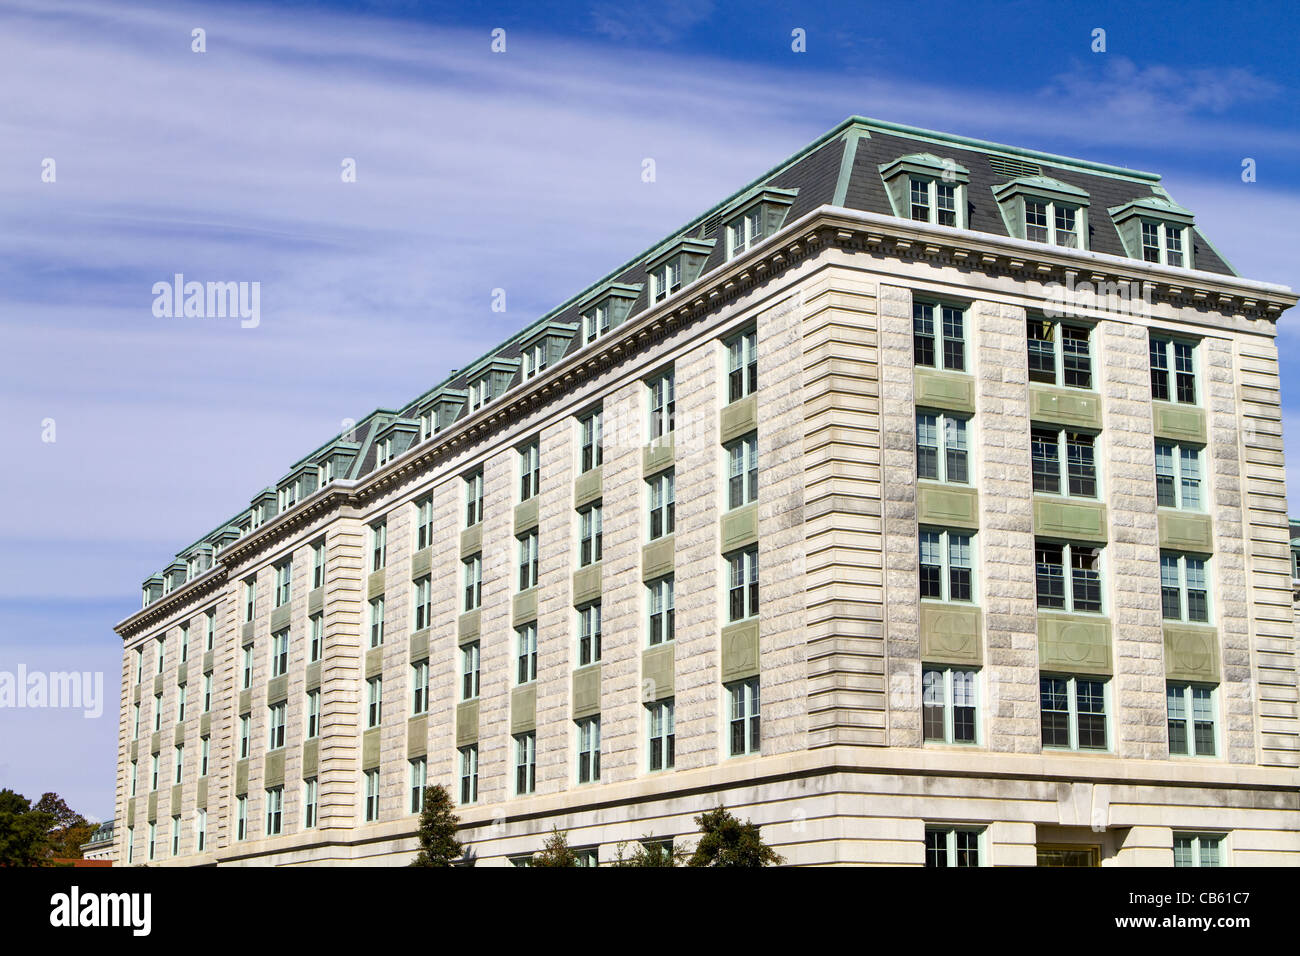 Barracks in der United States Naval Academy in Annapolis, Maryland. Stockfoto